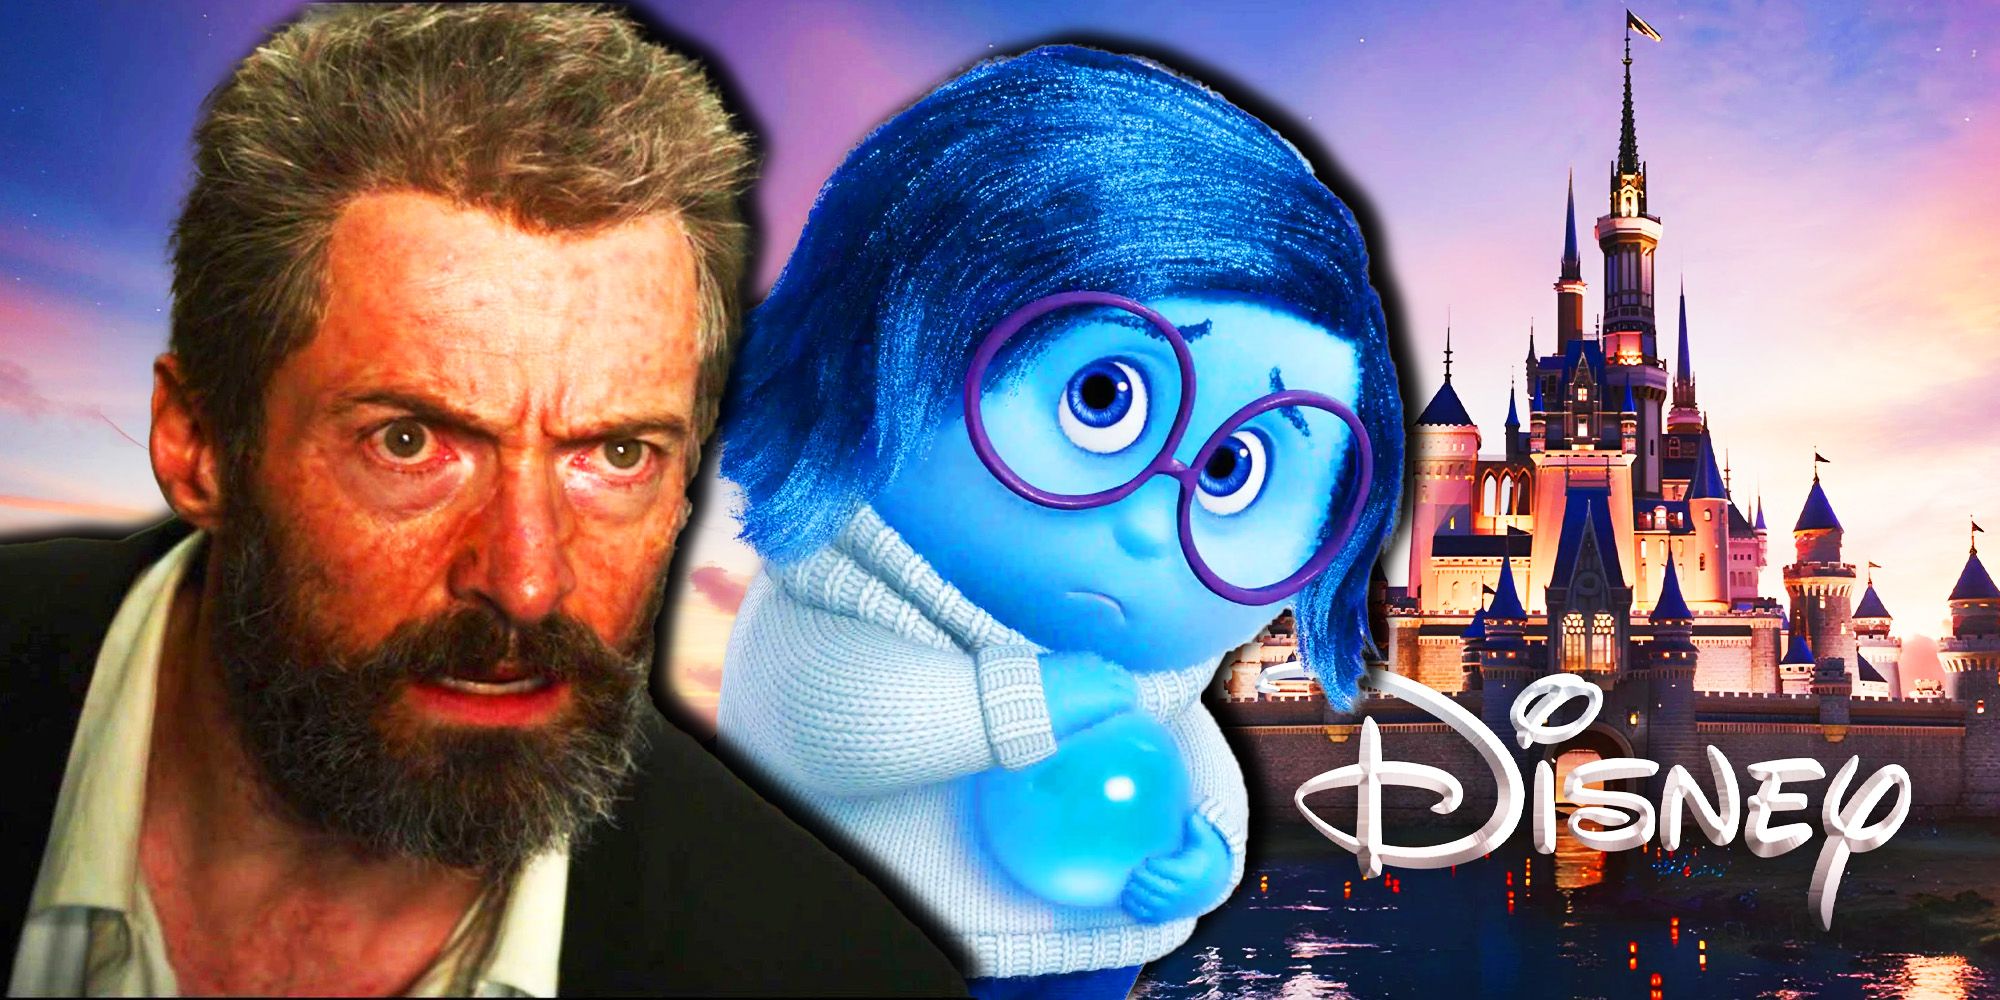 Hugh Jackman as Wolverine Sadness in Inside Out and Disney logo